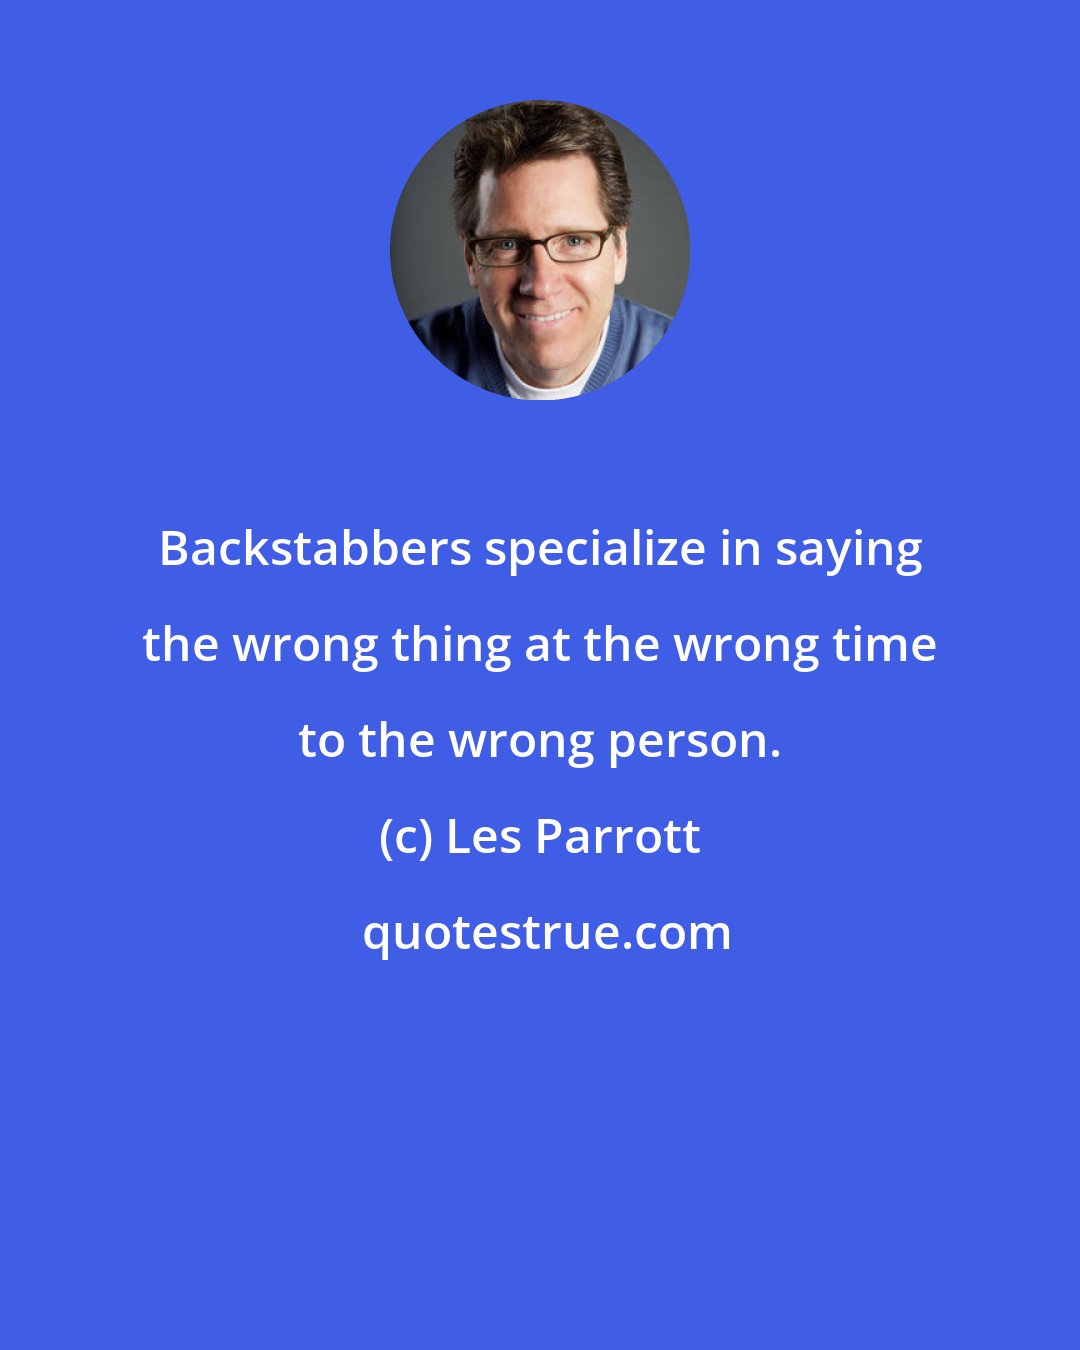 Les Parrott: Backstabbers specialize in saying the wrong thing at the wrong time to the wrong person.